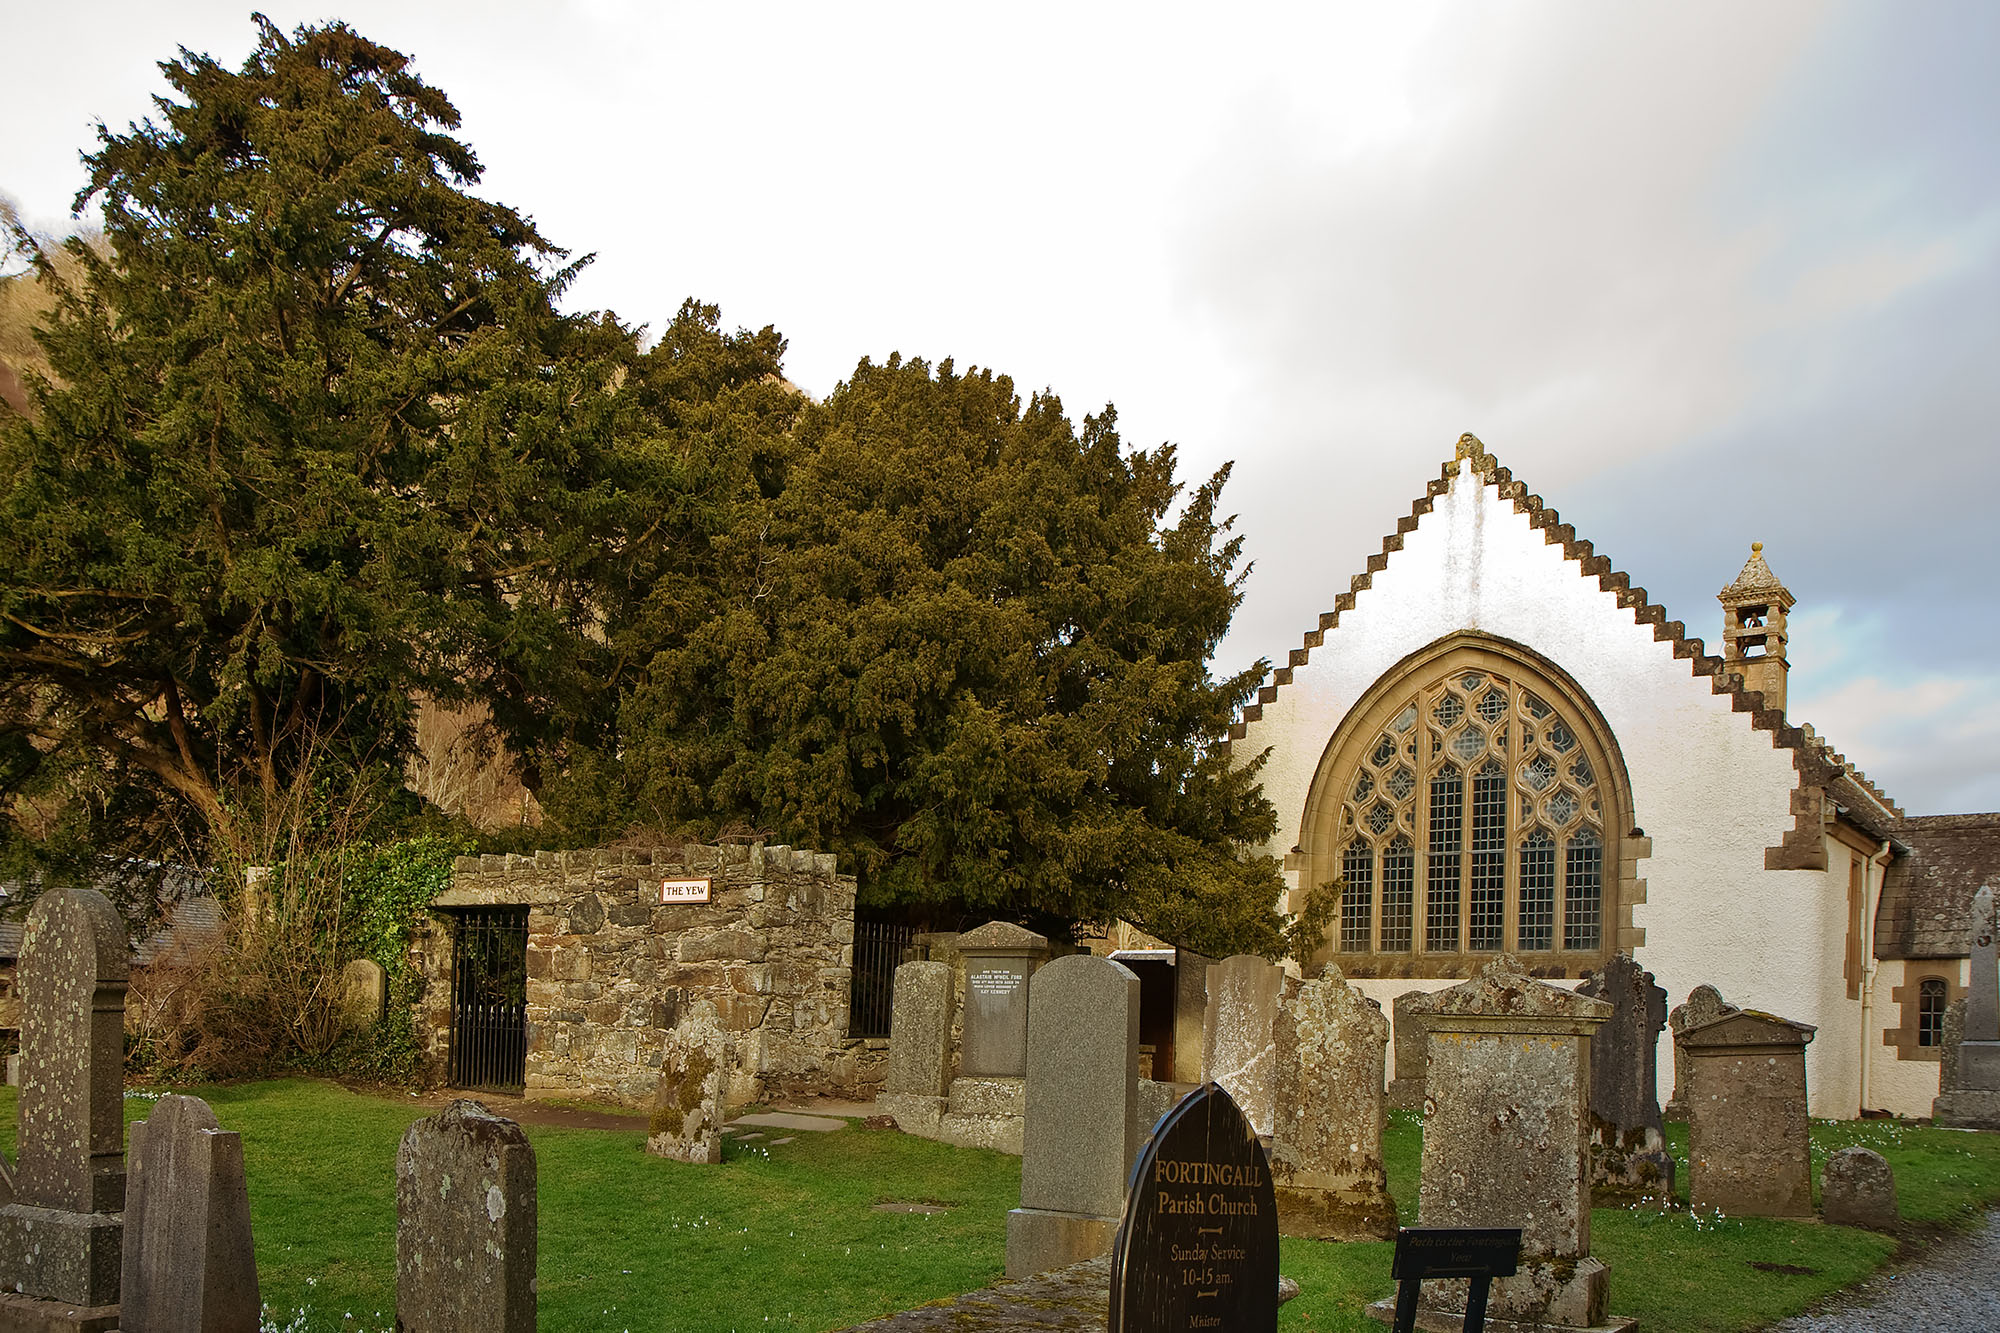 Fortingall Yew Tree (Taxus baccata), thousands of years old and the oldest living thing in Europe!